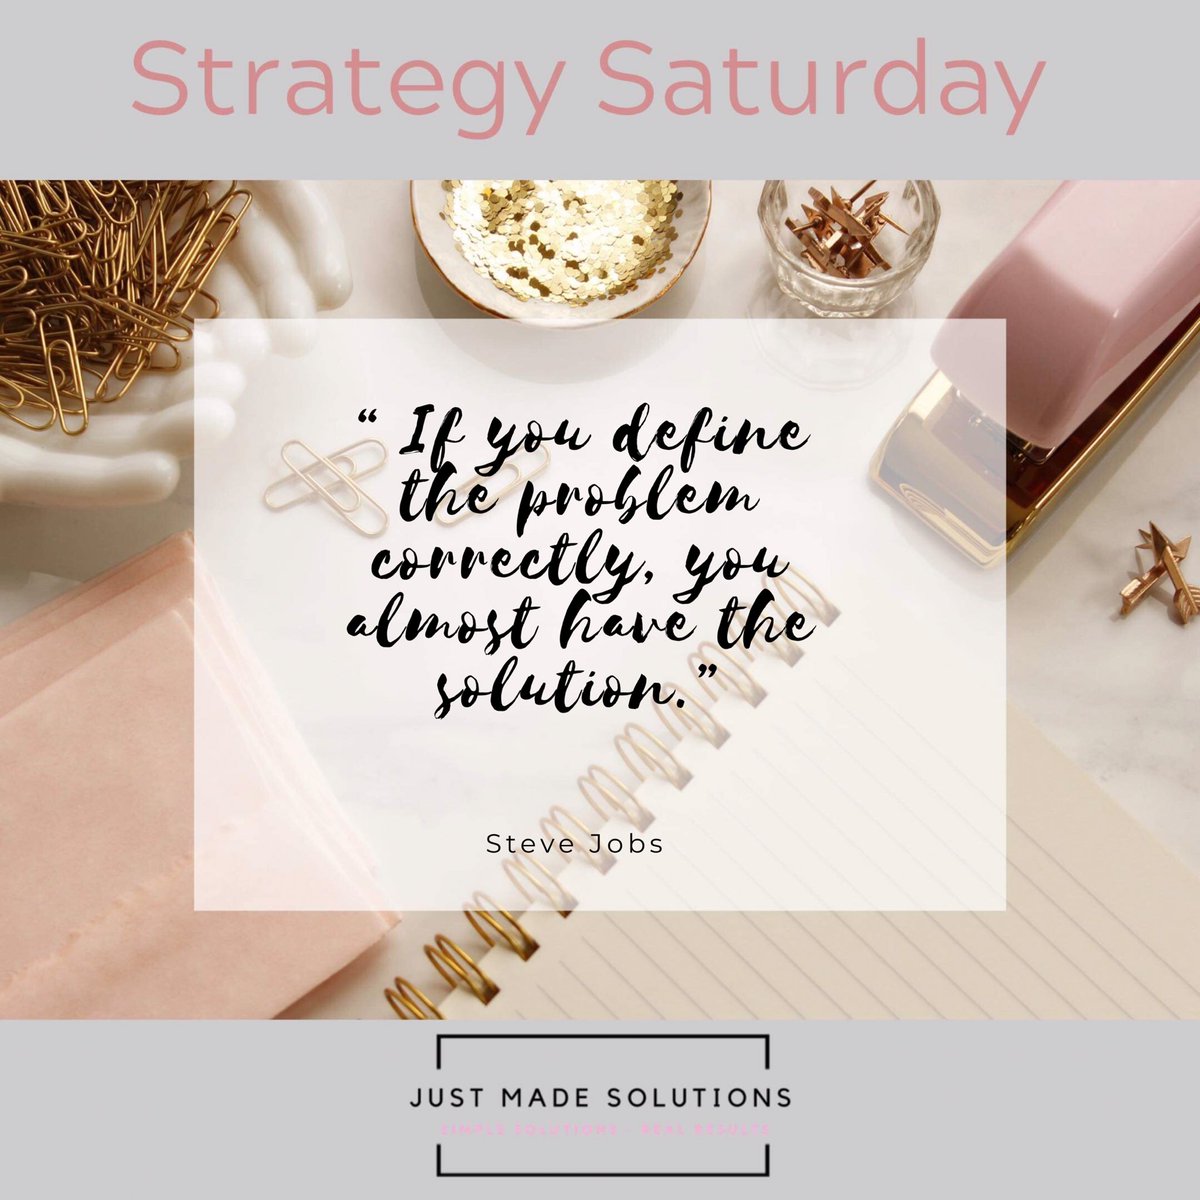 How are you getting to the next level? The next level is so achievable, but it’s up to you. 

Please don’t be stuck here, let’s connect and get you out of this stagnant phase! Level up, let’s go💪🏼💥

#strategysaturday #youcandothis #struggletosuccess #stevejobs